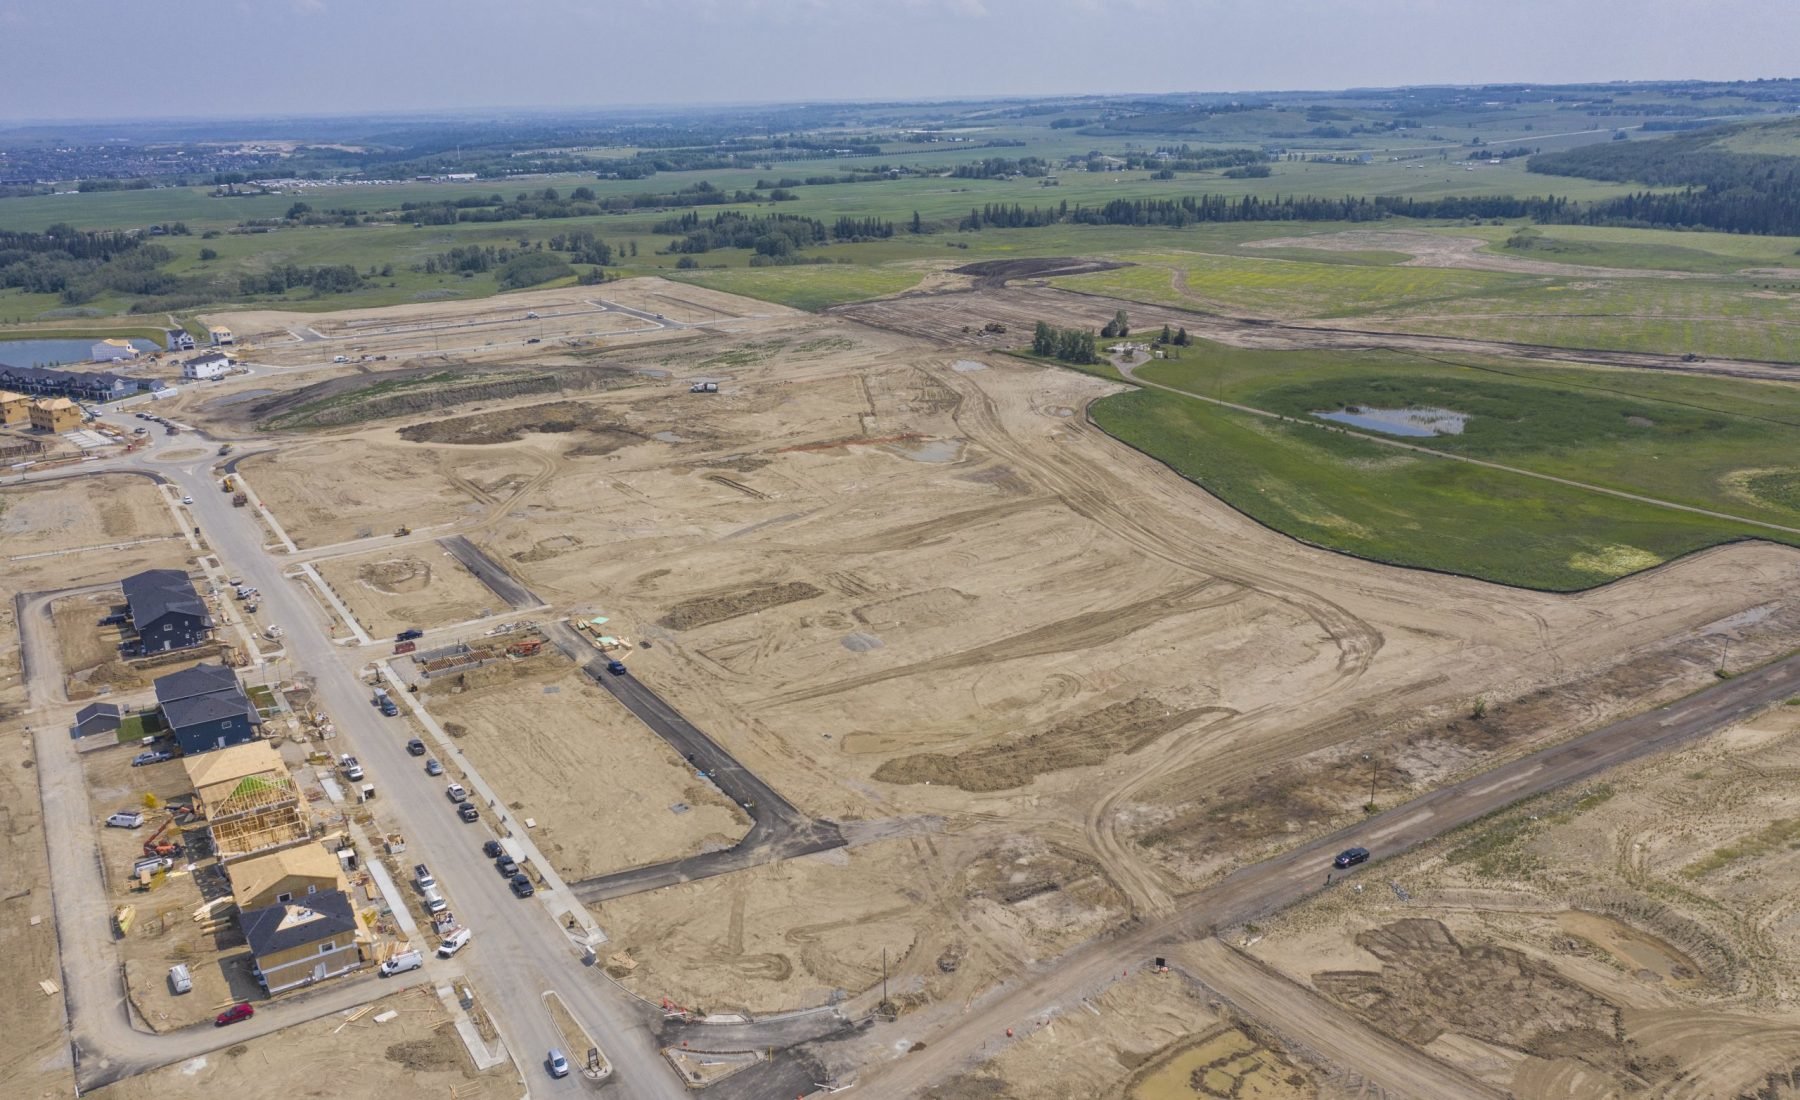 Aerial image of Pine Creek, a new community under construction in SW Calgary AB